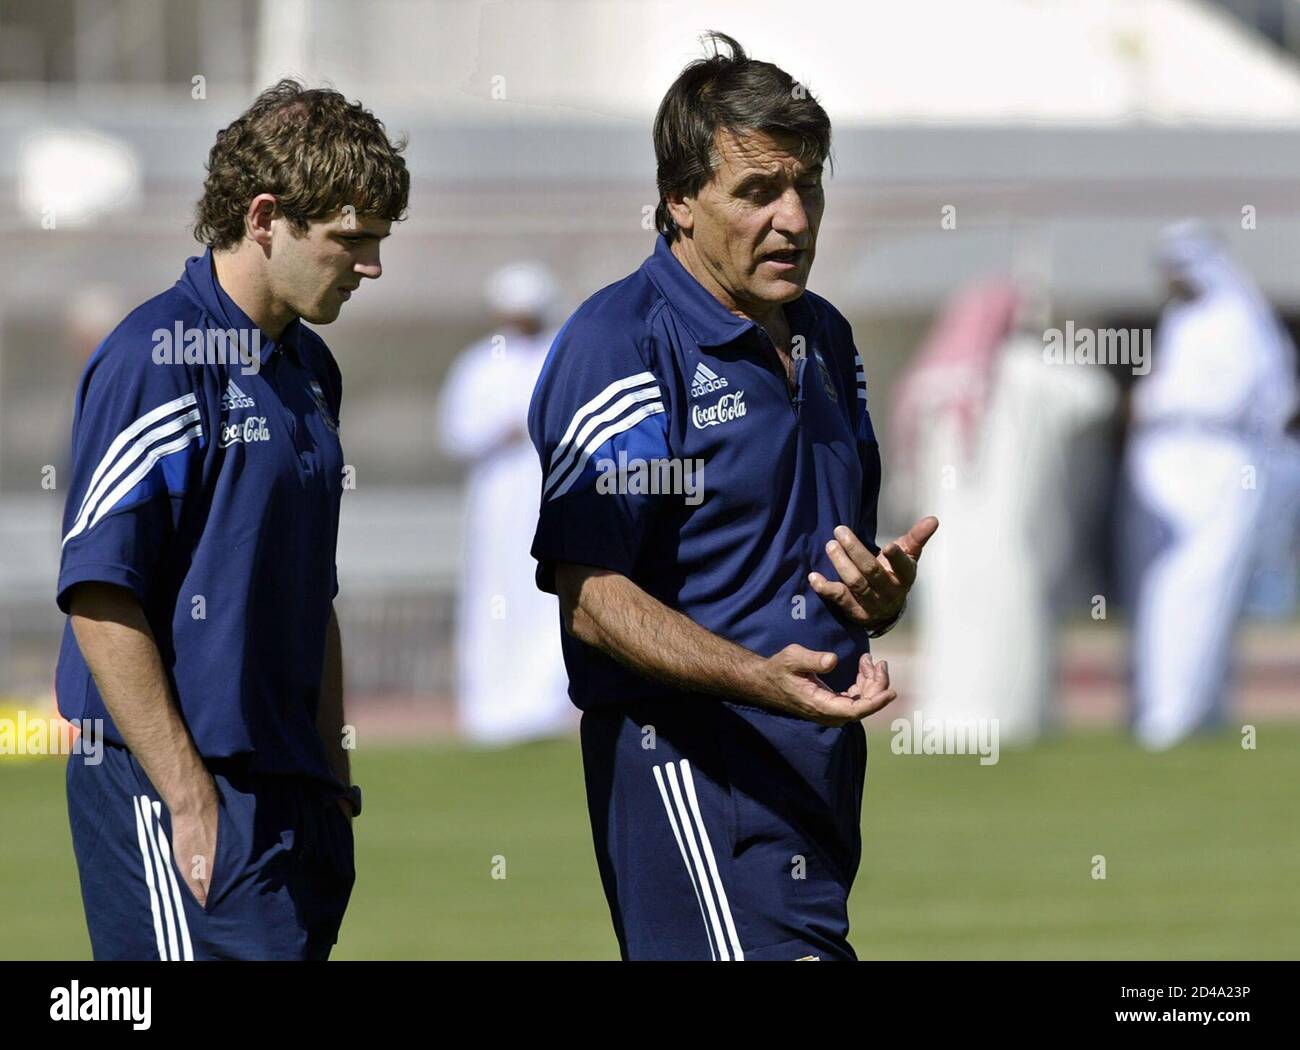 Argentina's Under 20 soccer team coach Hugo Tocalli (R) talks to player  Walter Montillo during their training session at Al Shaab Sports Club in  Sharjah, November 27, 2003. Argentina will face Spain